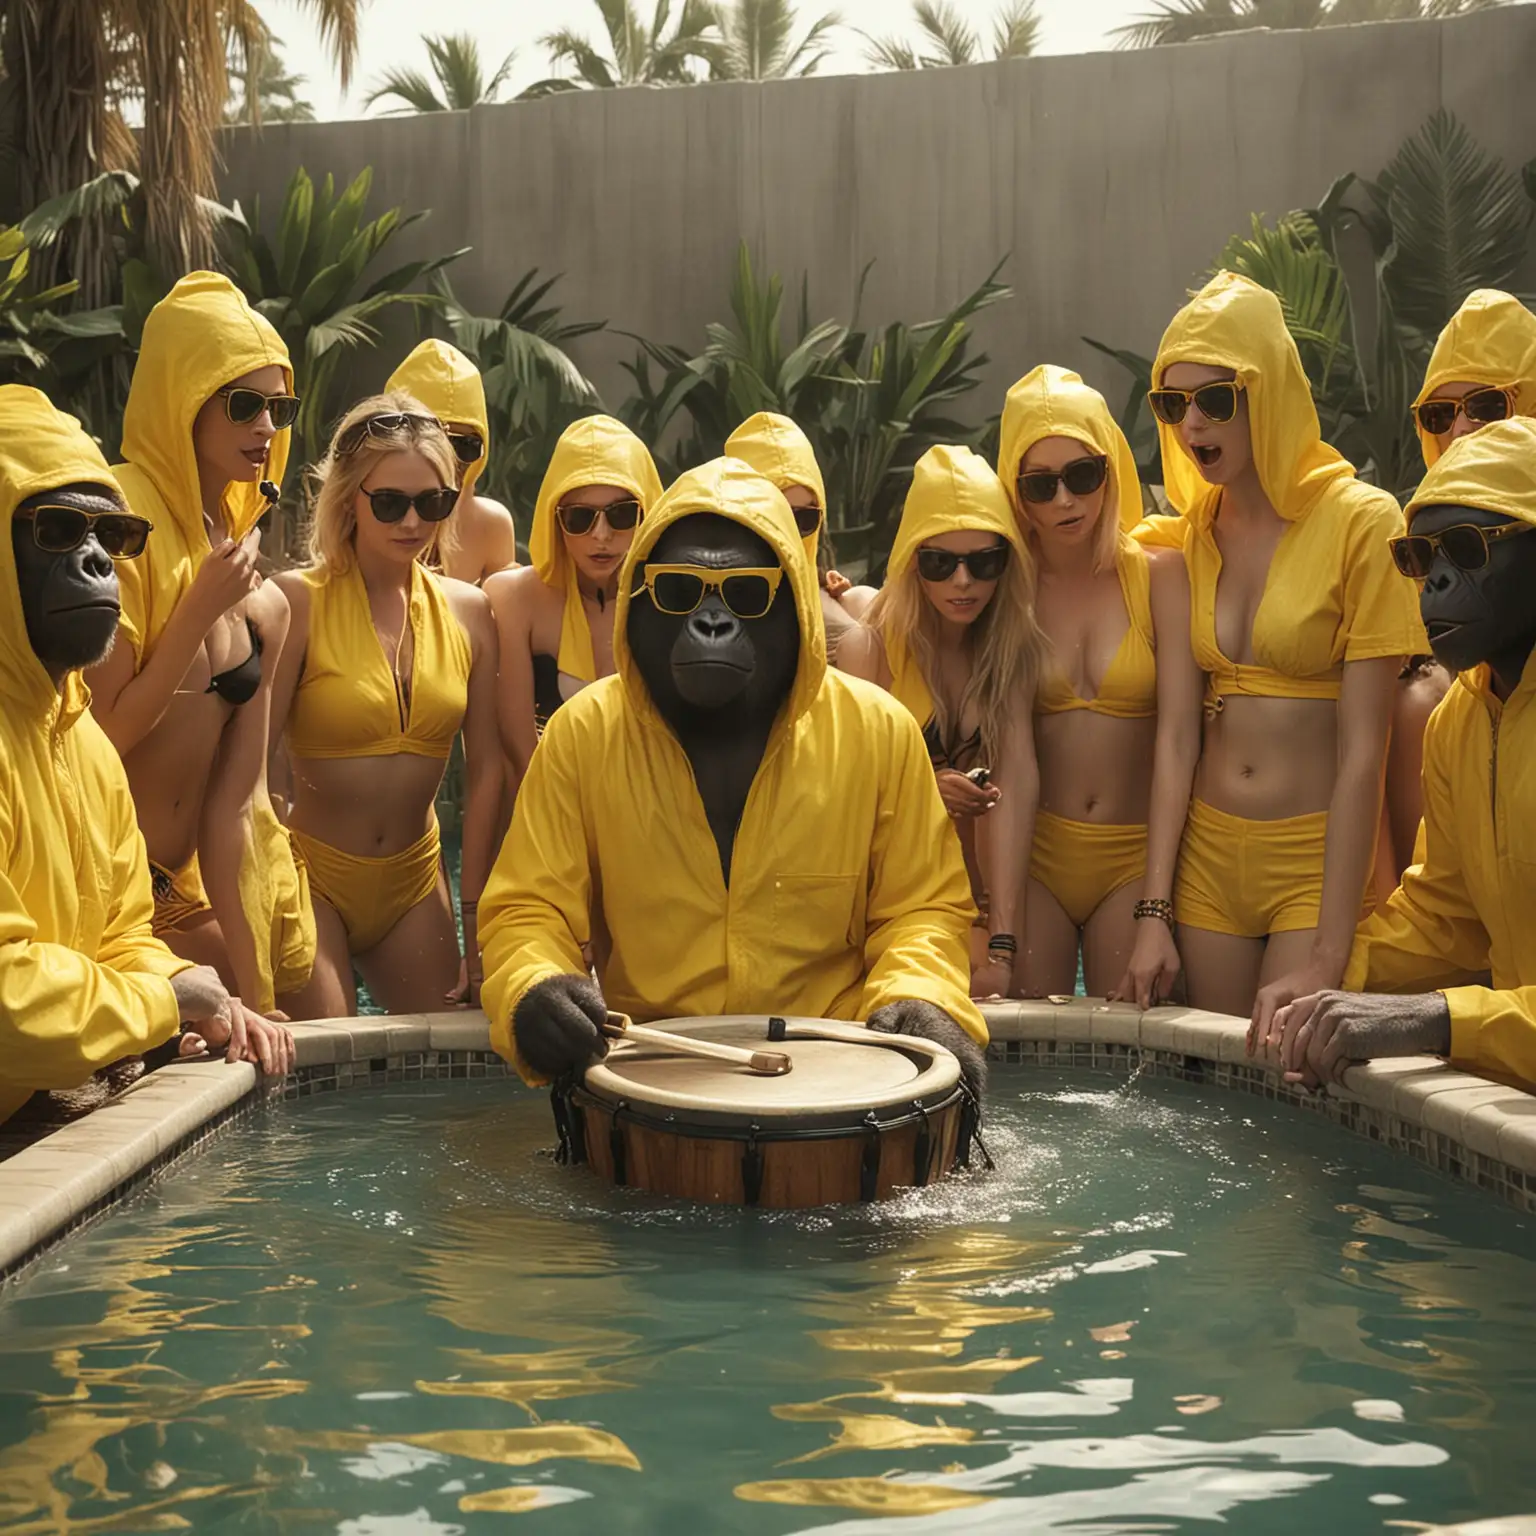 The gorilla is inside a huge jacuzzi surrounded by sexy blonde women in bikini. he is playing african percusion. The gorilla wears dark sunglasses and a YELLOW COLOR jumpsuit like the one in the Breaking Bad series. His head is covered by the yellow hood. 
he is playing an african drum instrument. Close up. cinematic. FACING THE CAMERA. party